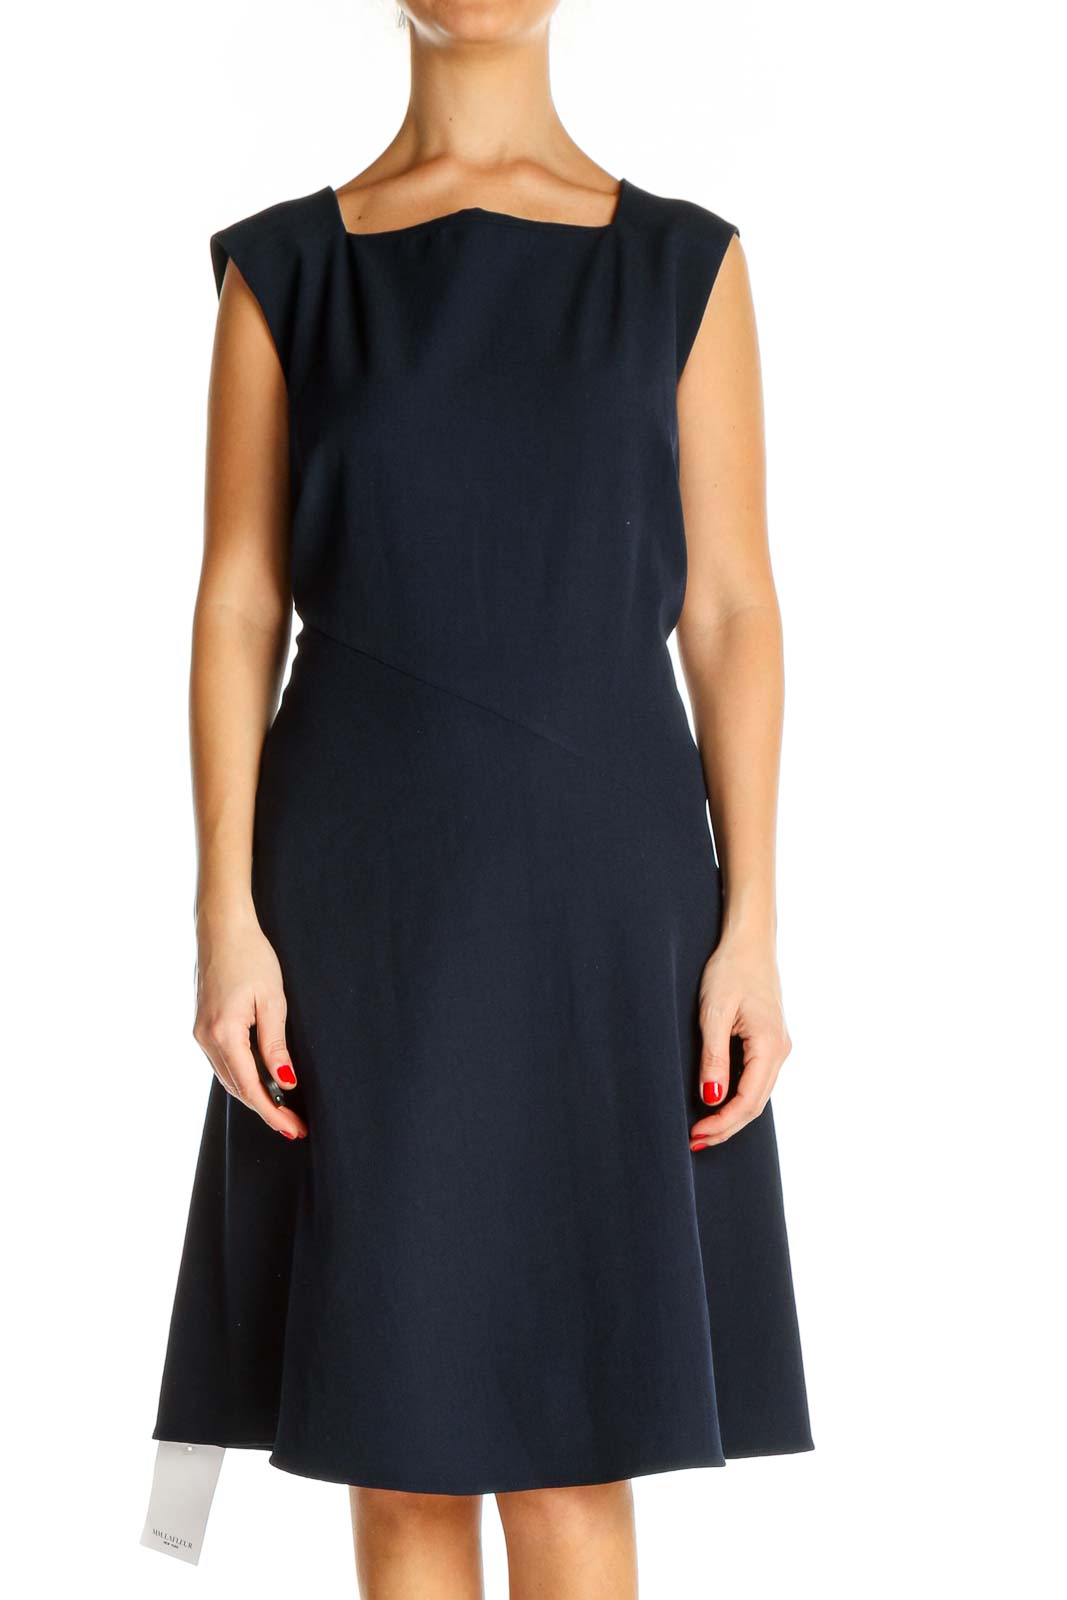 Blue Solid Classic Fit & Flare Dress Front